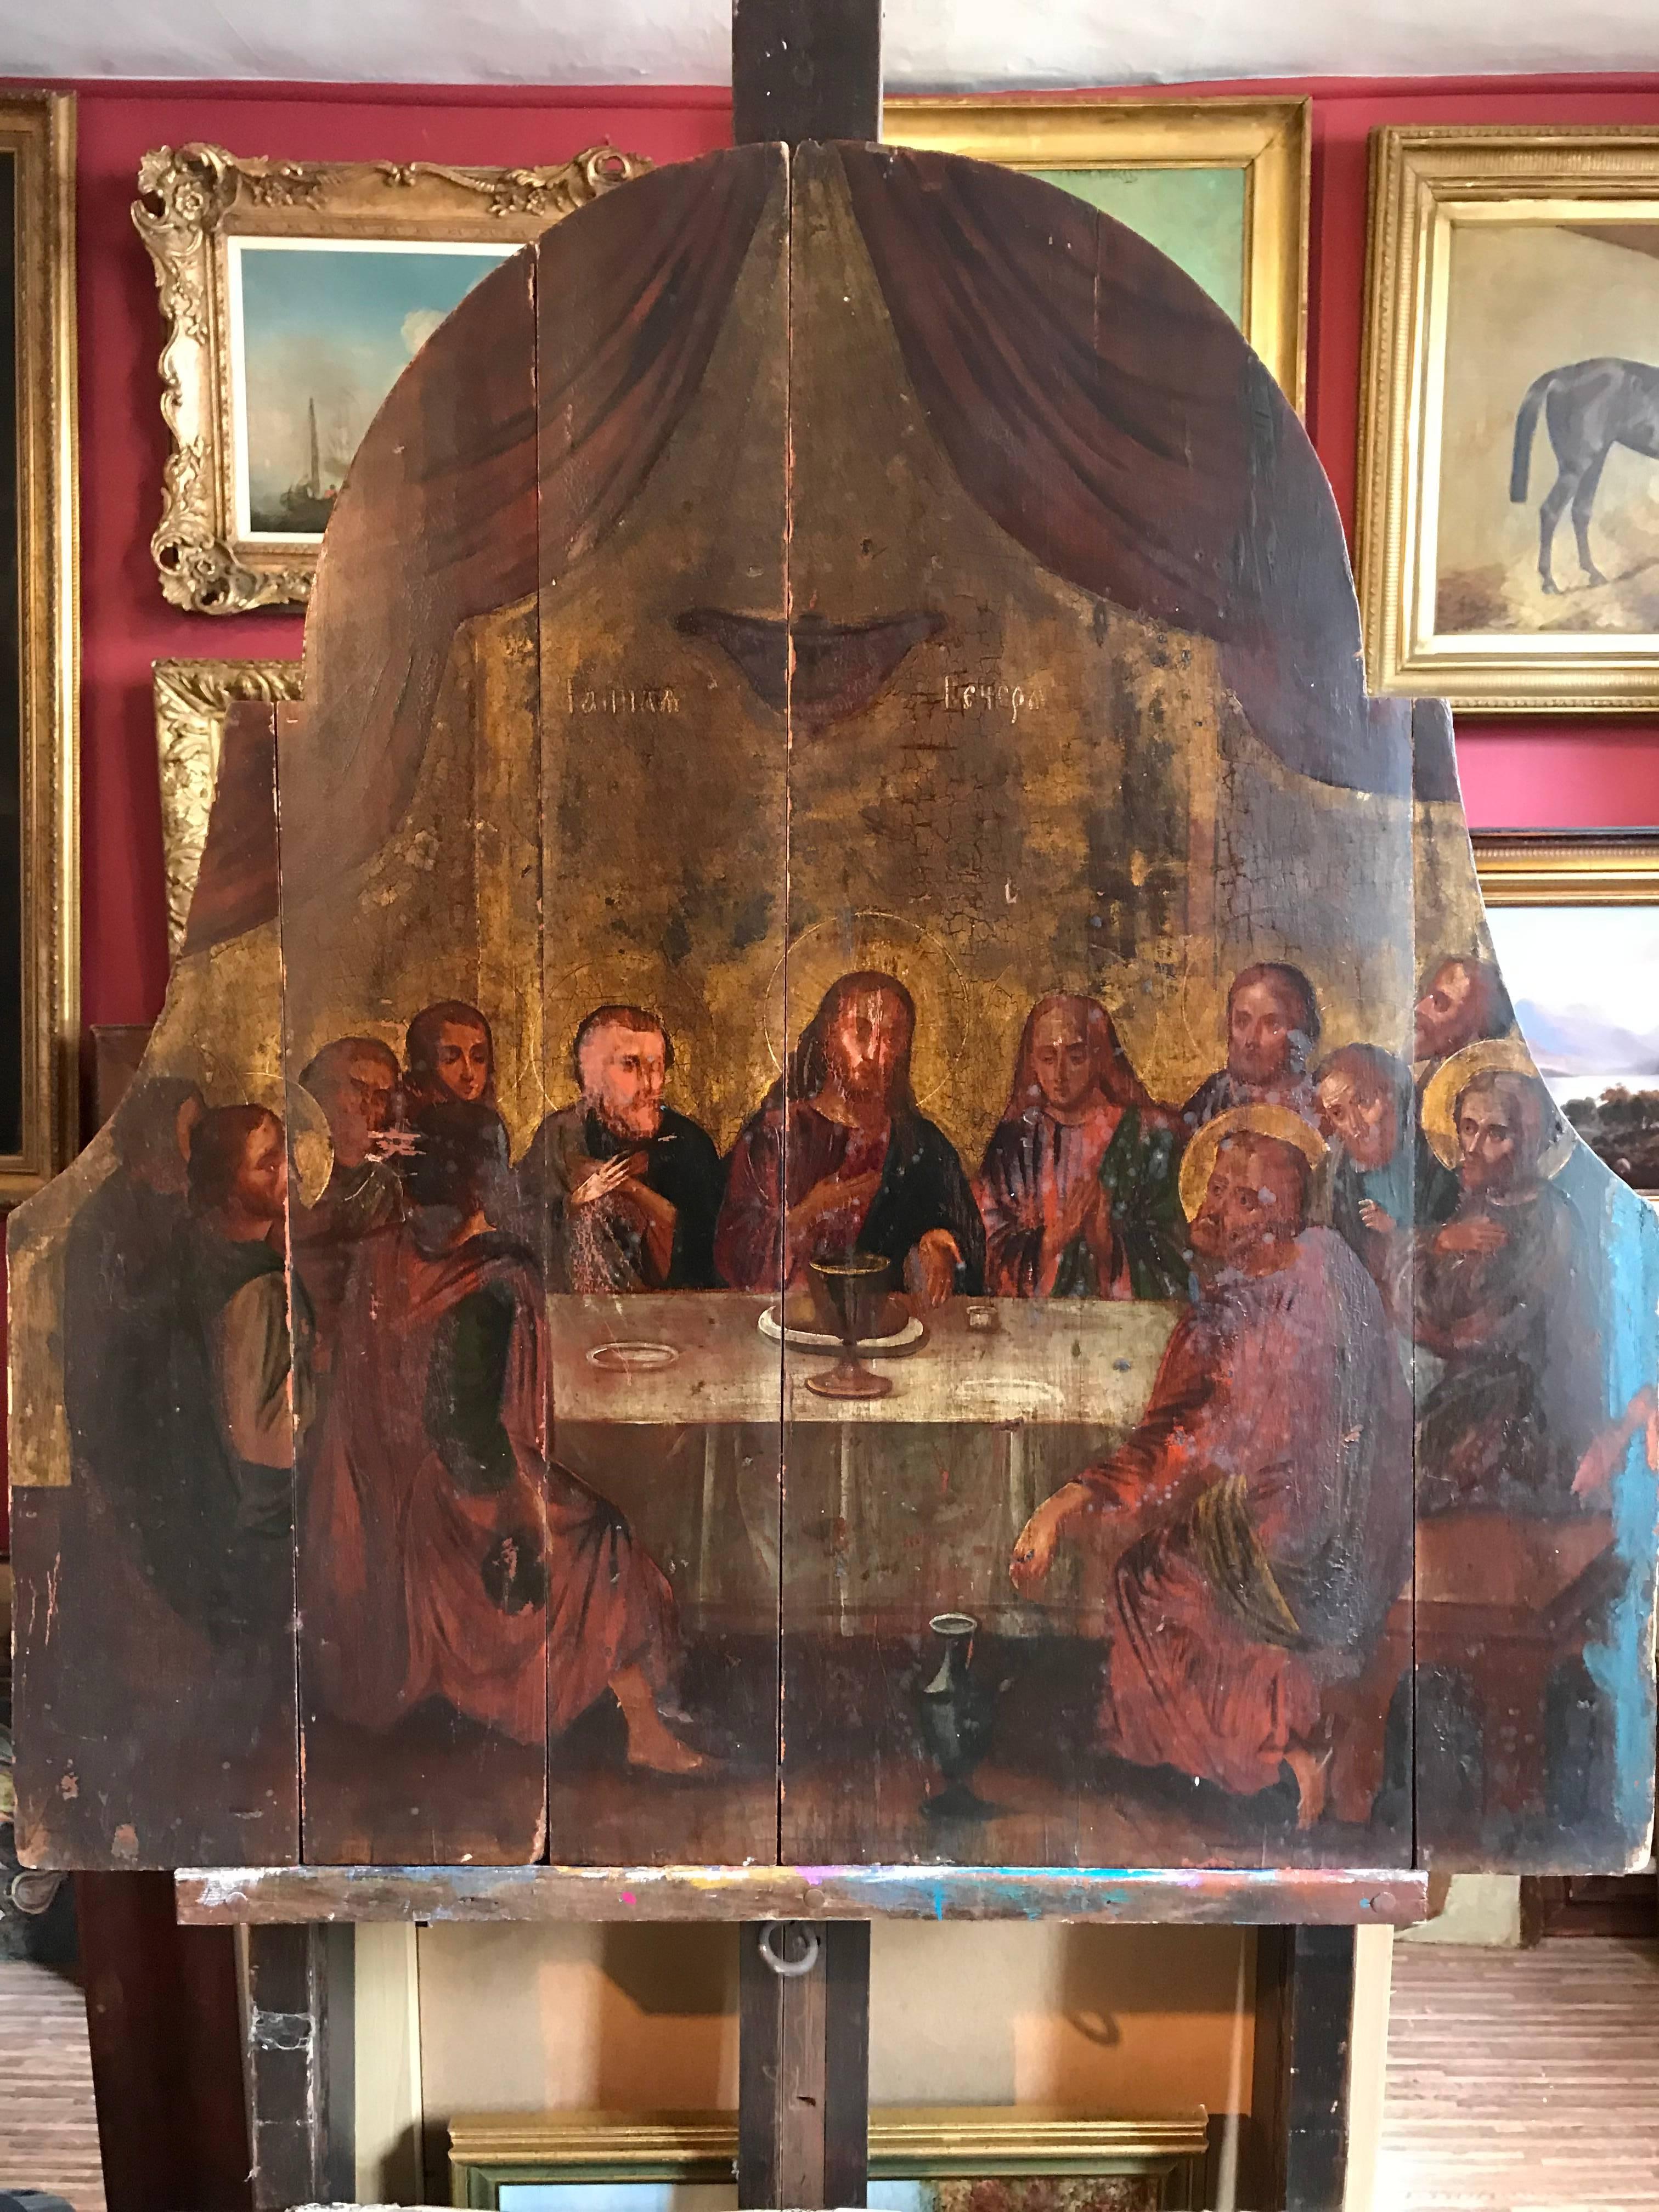 Unknown Figurative Painting - The Last Supper, 18th century Russian Old Master Oil Painting on Wood Panels